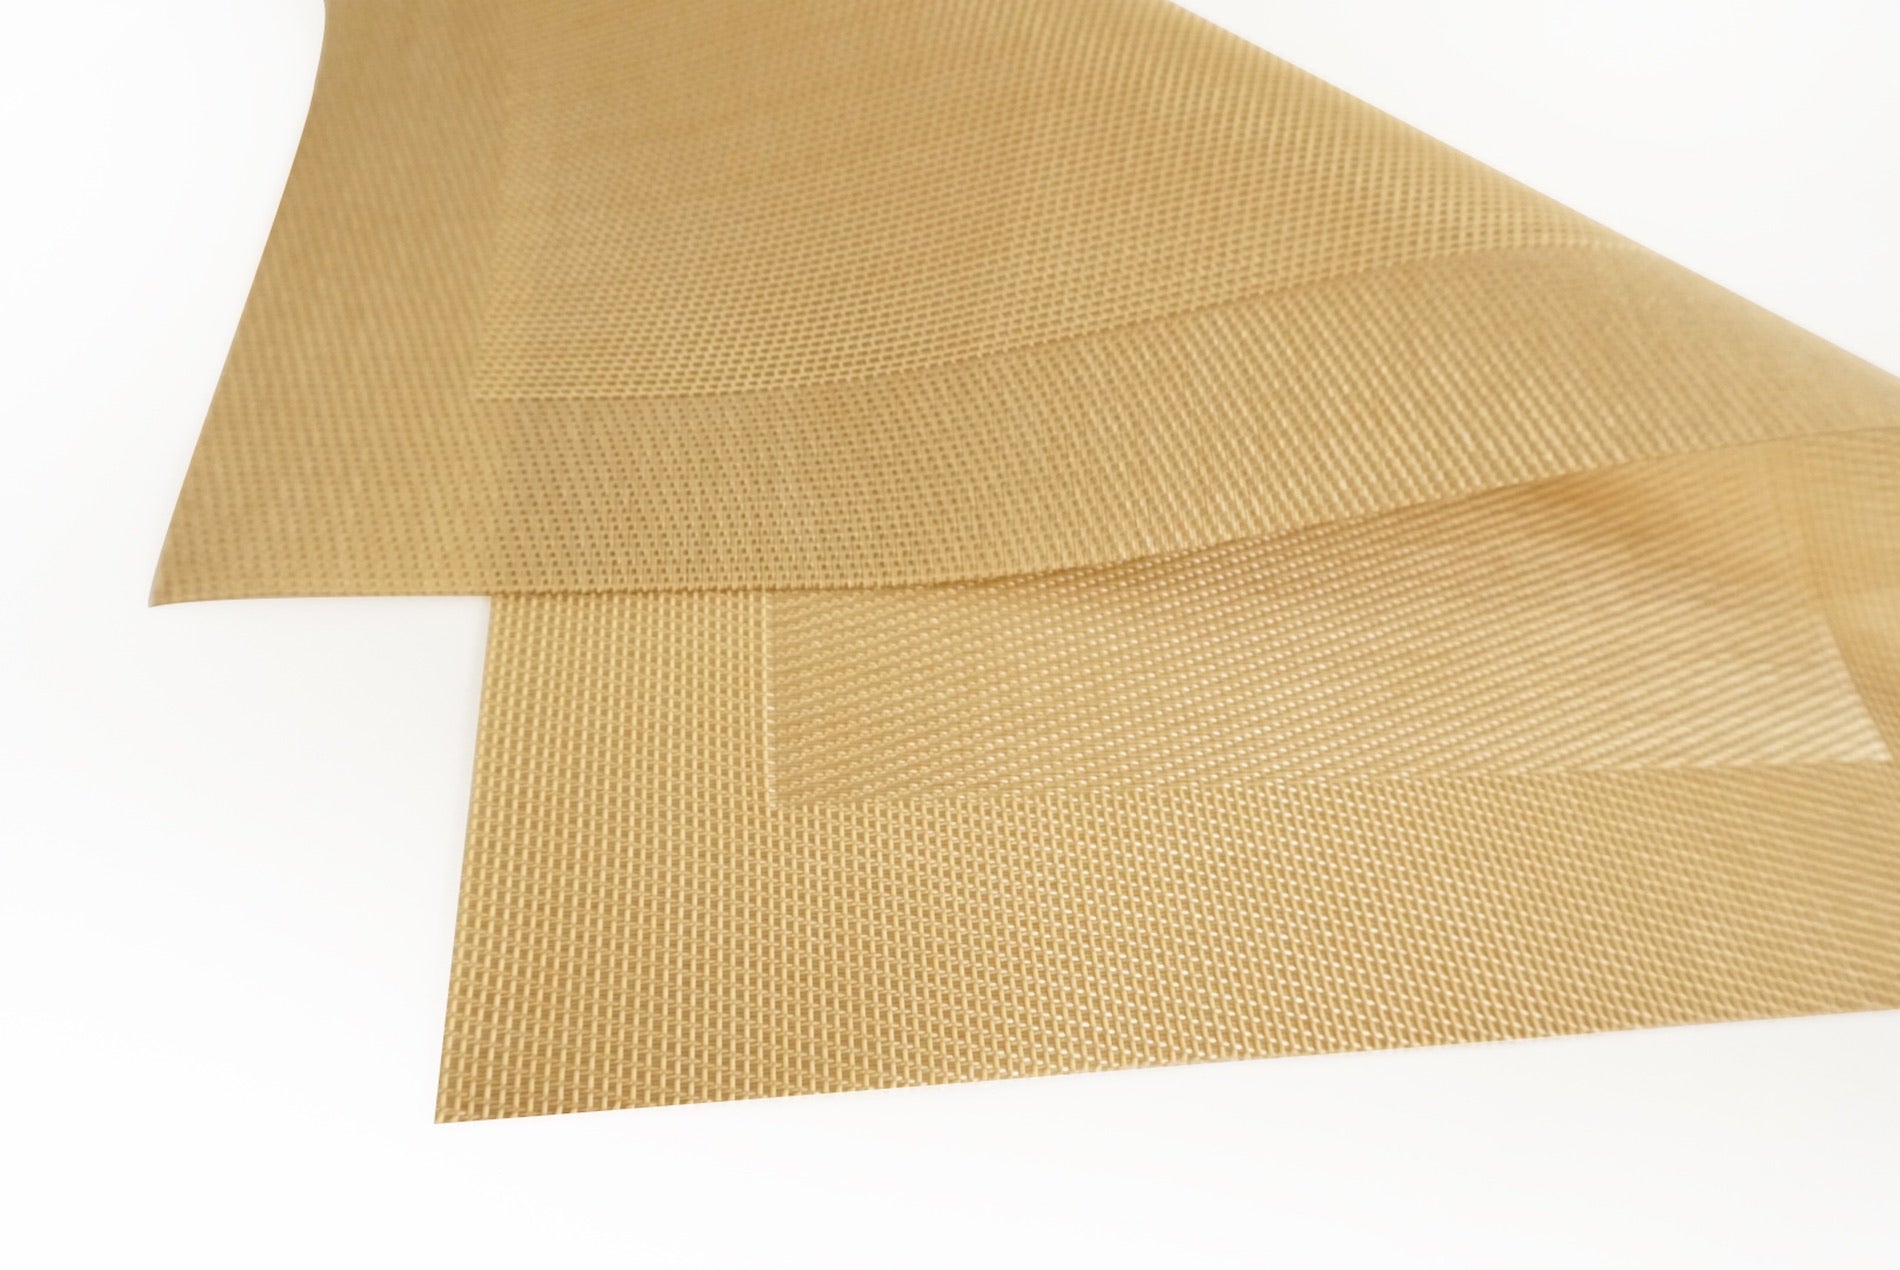 Dainty Home Napa Woven Textilene Crossweave With Solid Geometric Pattern Reversible 15" x 15" Square Placemats